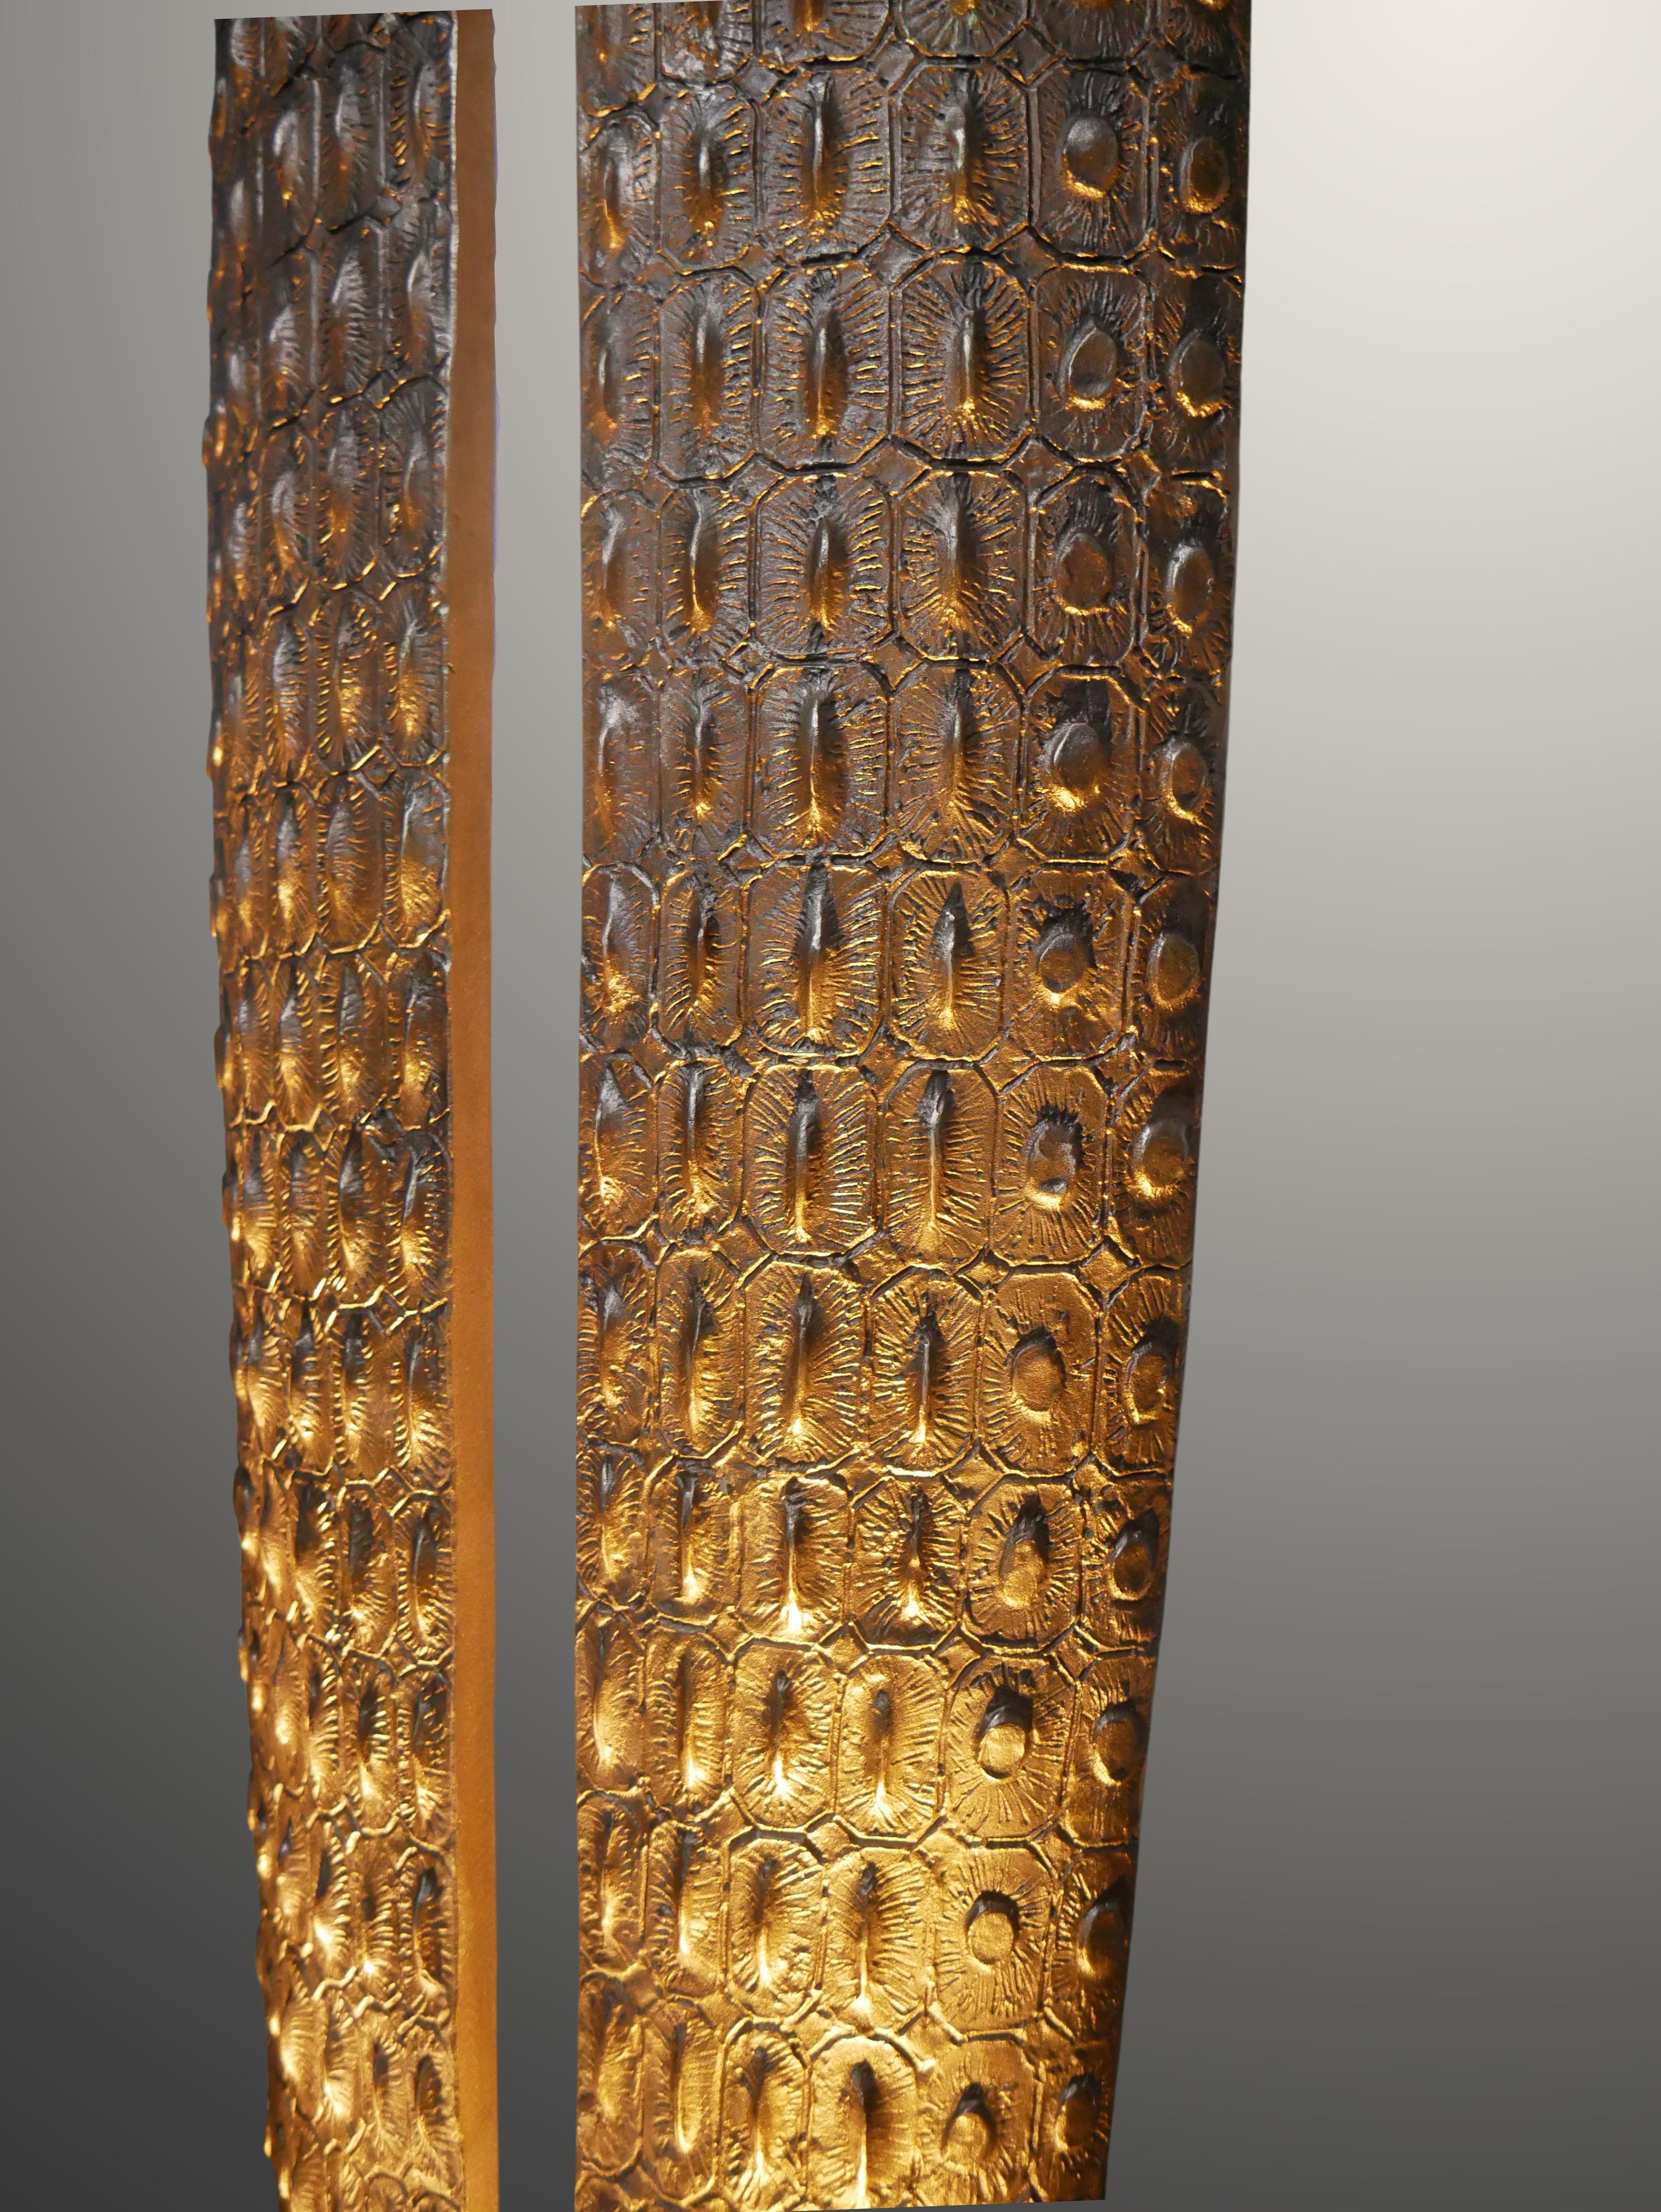 Floor lamp in gilded bronze with a natural curve that resembles the scale texture of crocodile skin, effortlessly striking the balance between rational and organic forms. Handcrafted by French sculptor Patrick Laroche in his workshop in